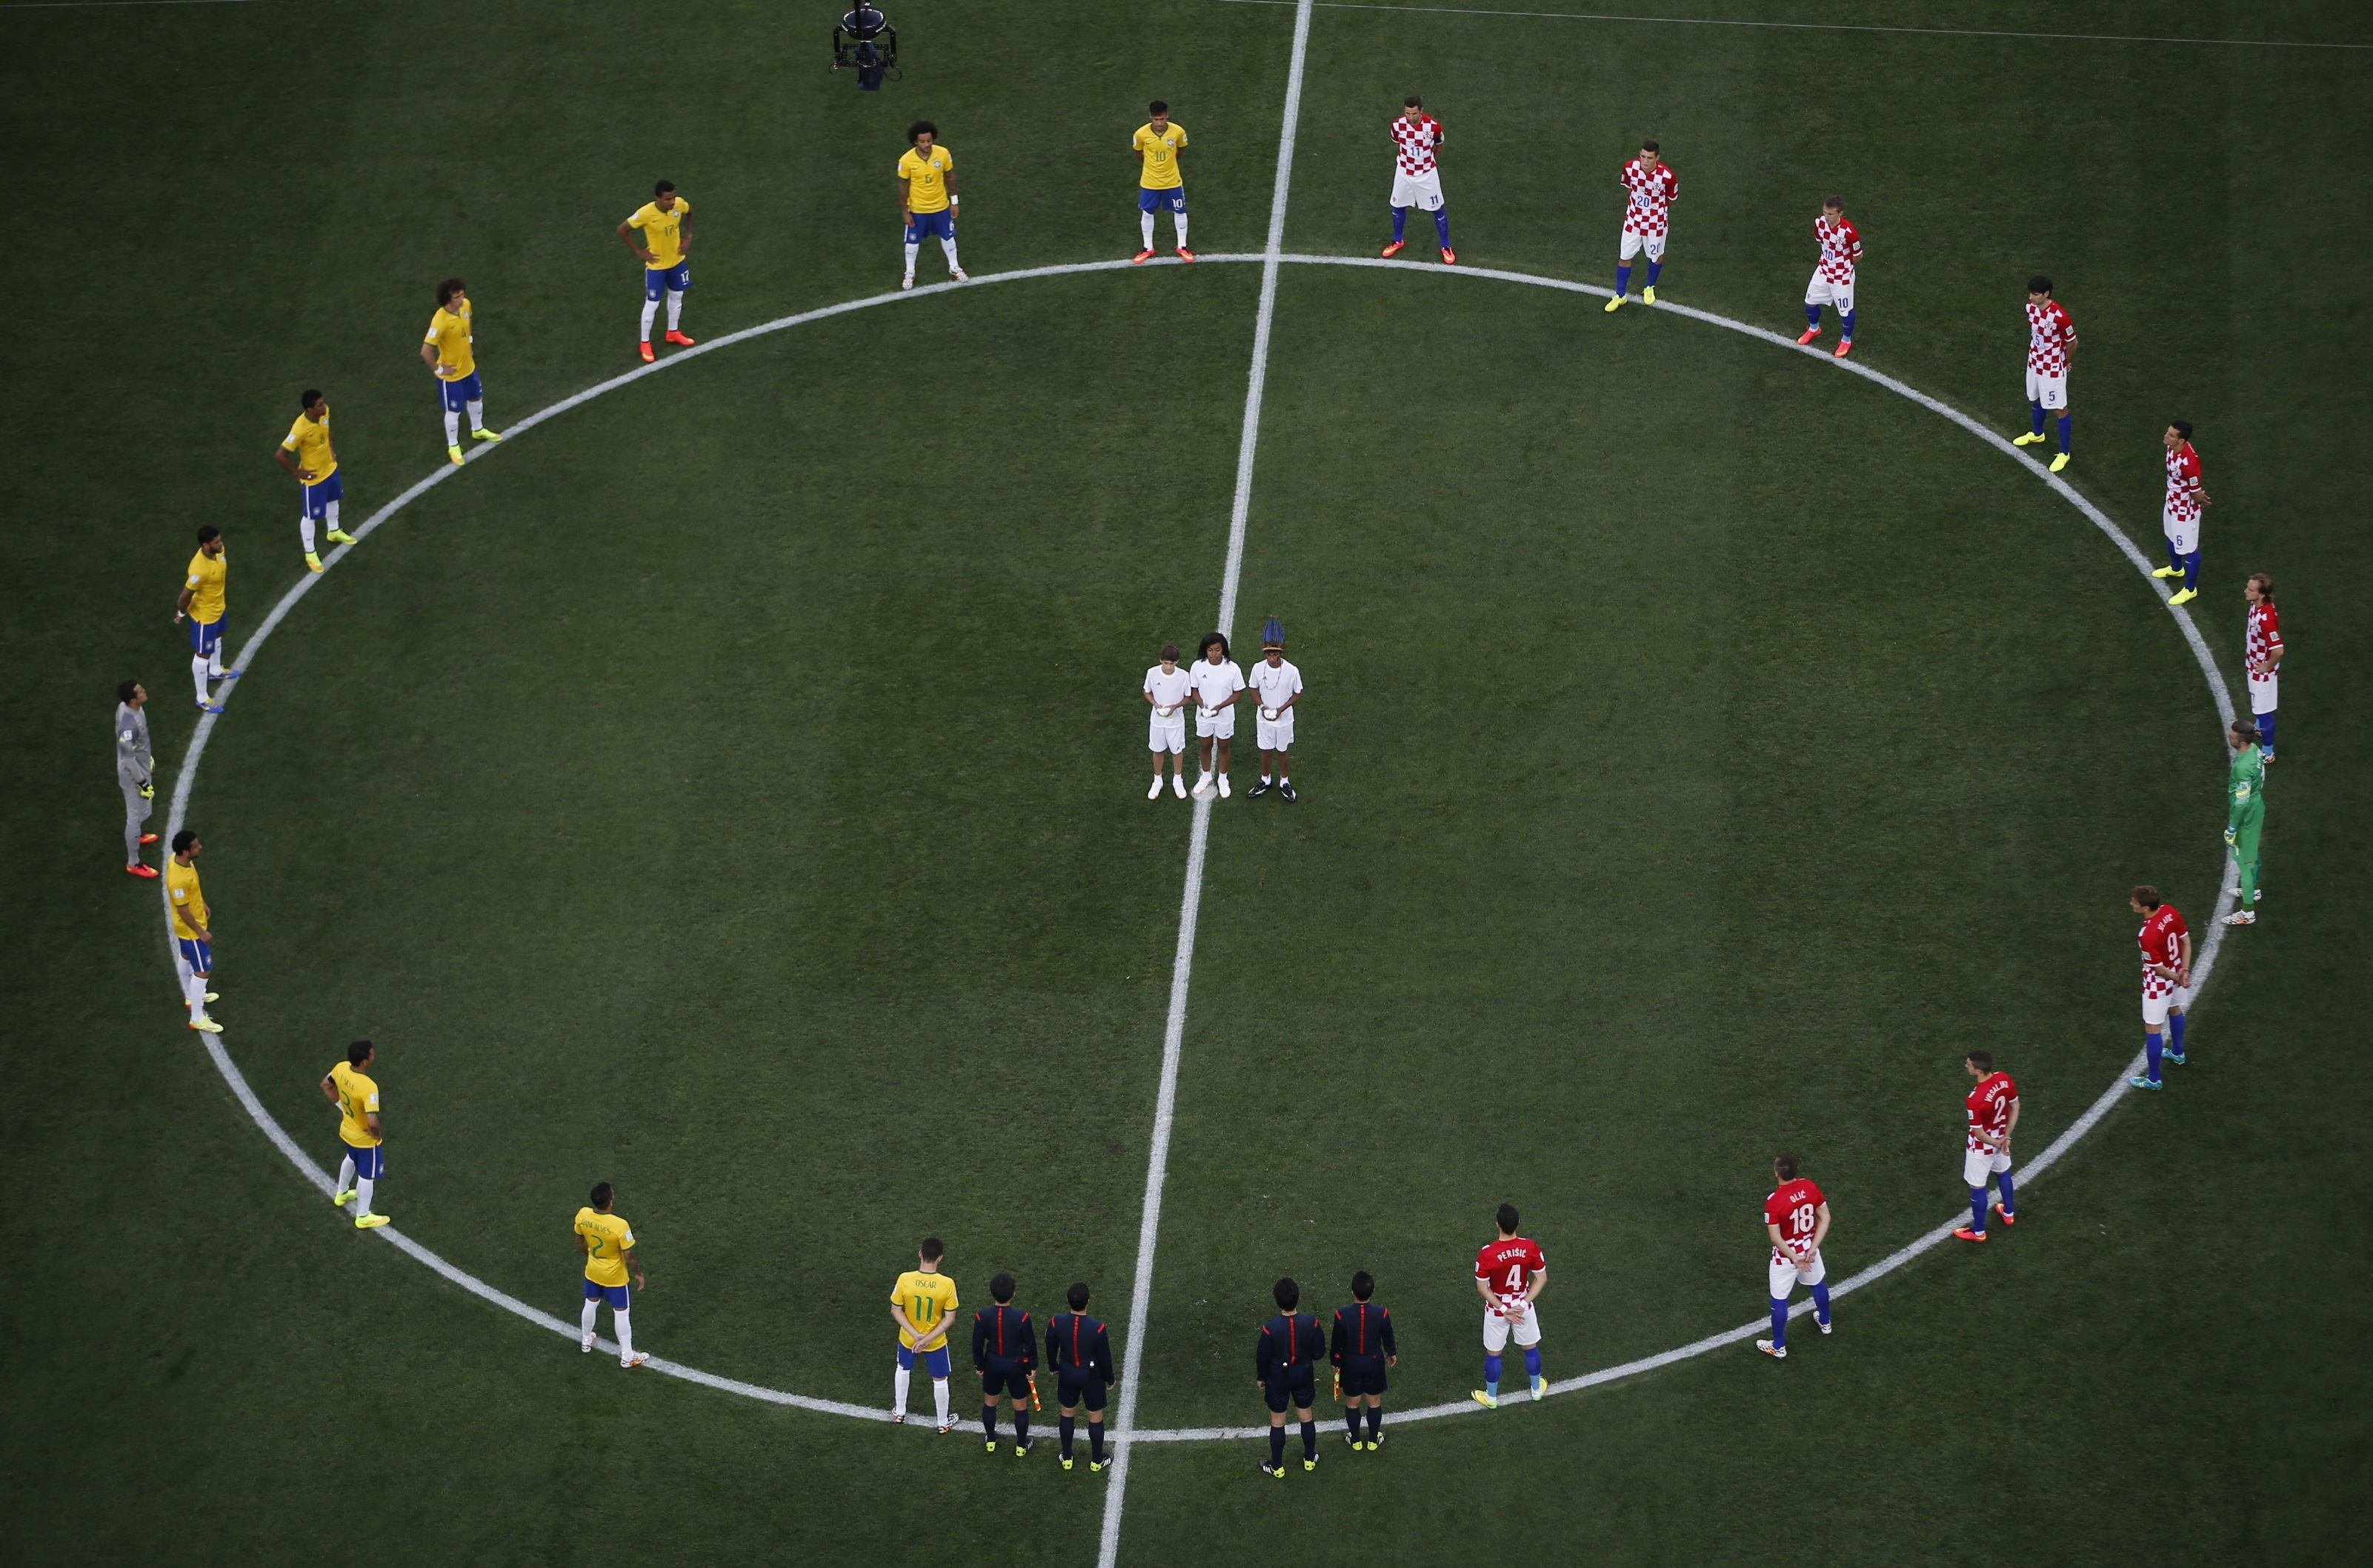 Brazil and Croatia players stand in a circle as doves are released before kickoff at the 2014 World Cup opening match at the Corinthians arena in Sao Paulo on June 12, 2014.